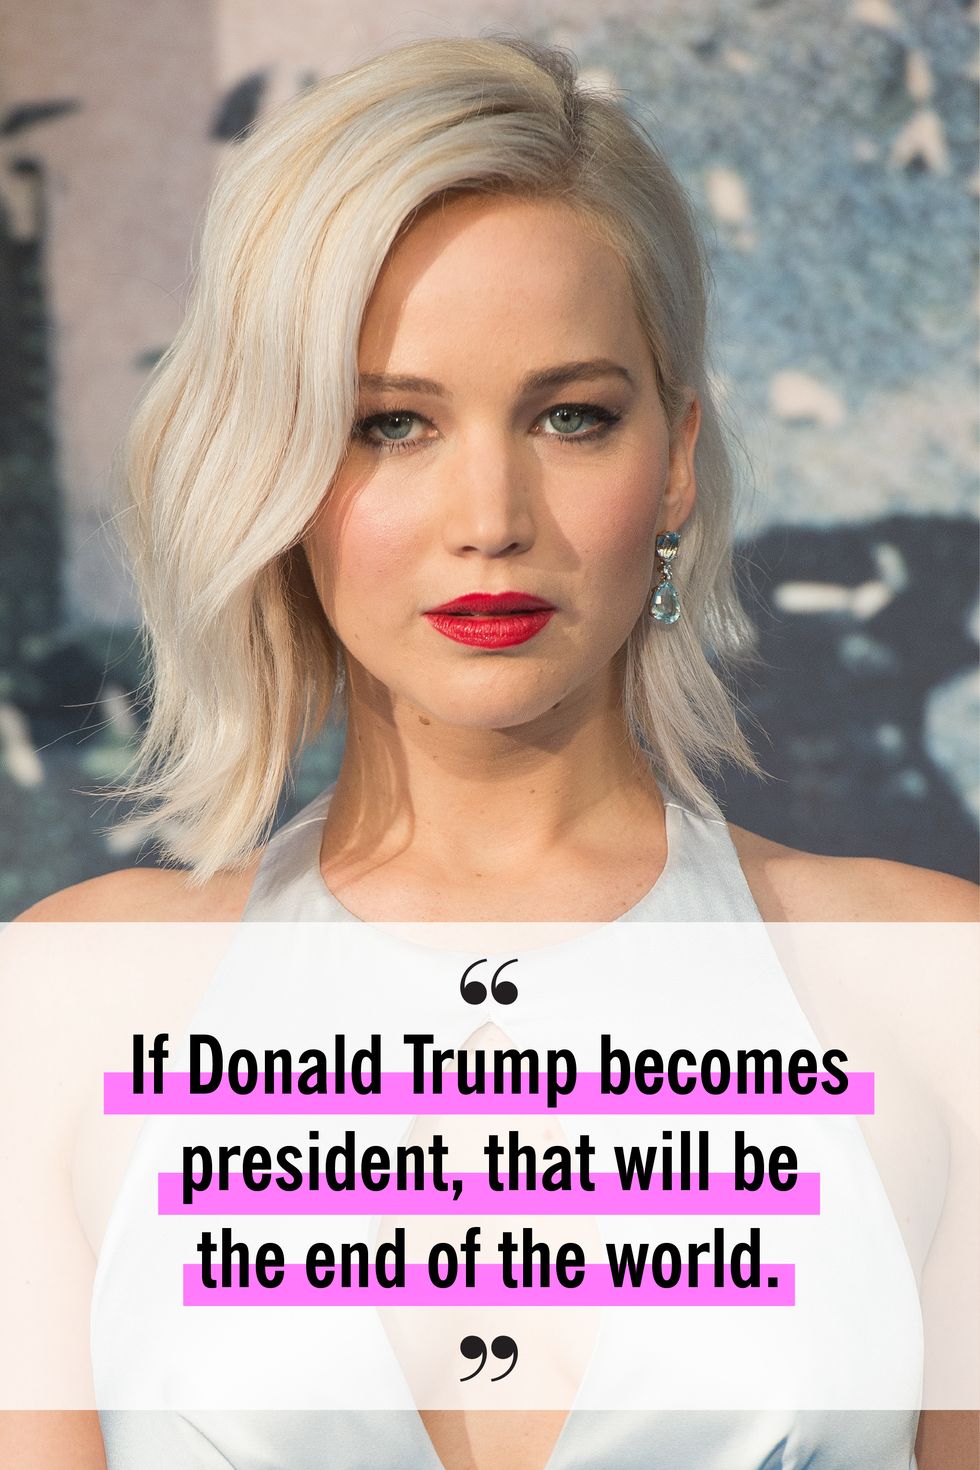 36 Celebrities Who Hate Donald Trump - Celeb Quotes About Trump